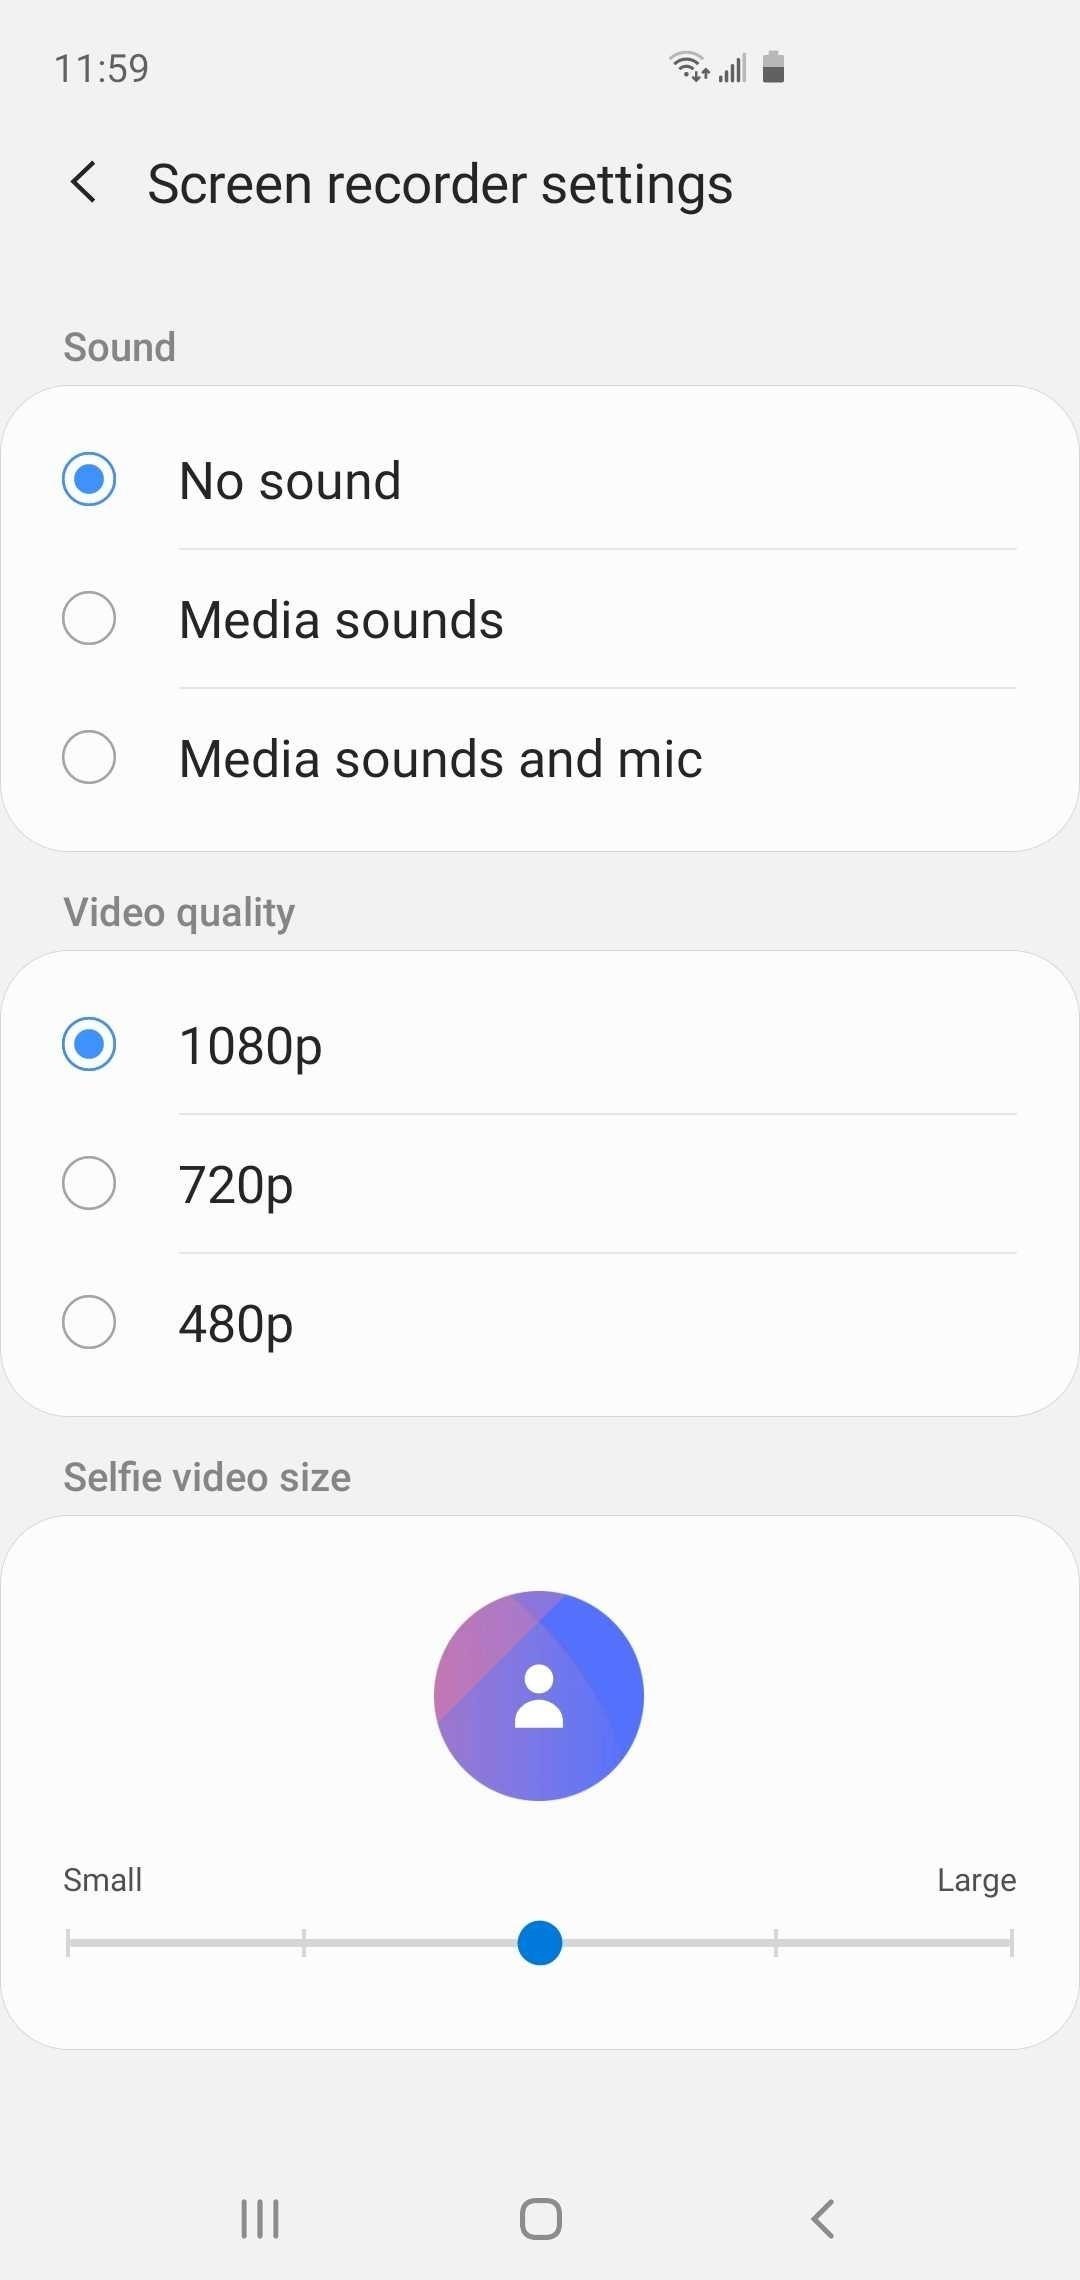 How to Use Samsung's Hidden Screen Recorder on One UI 2